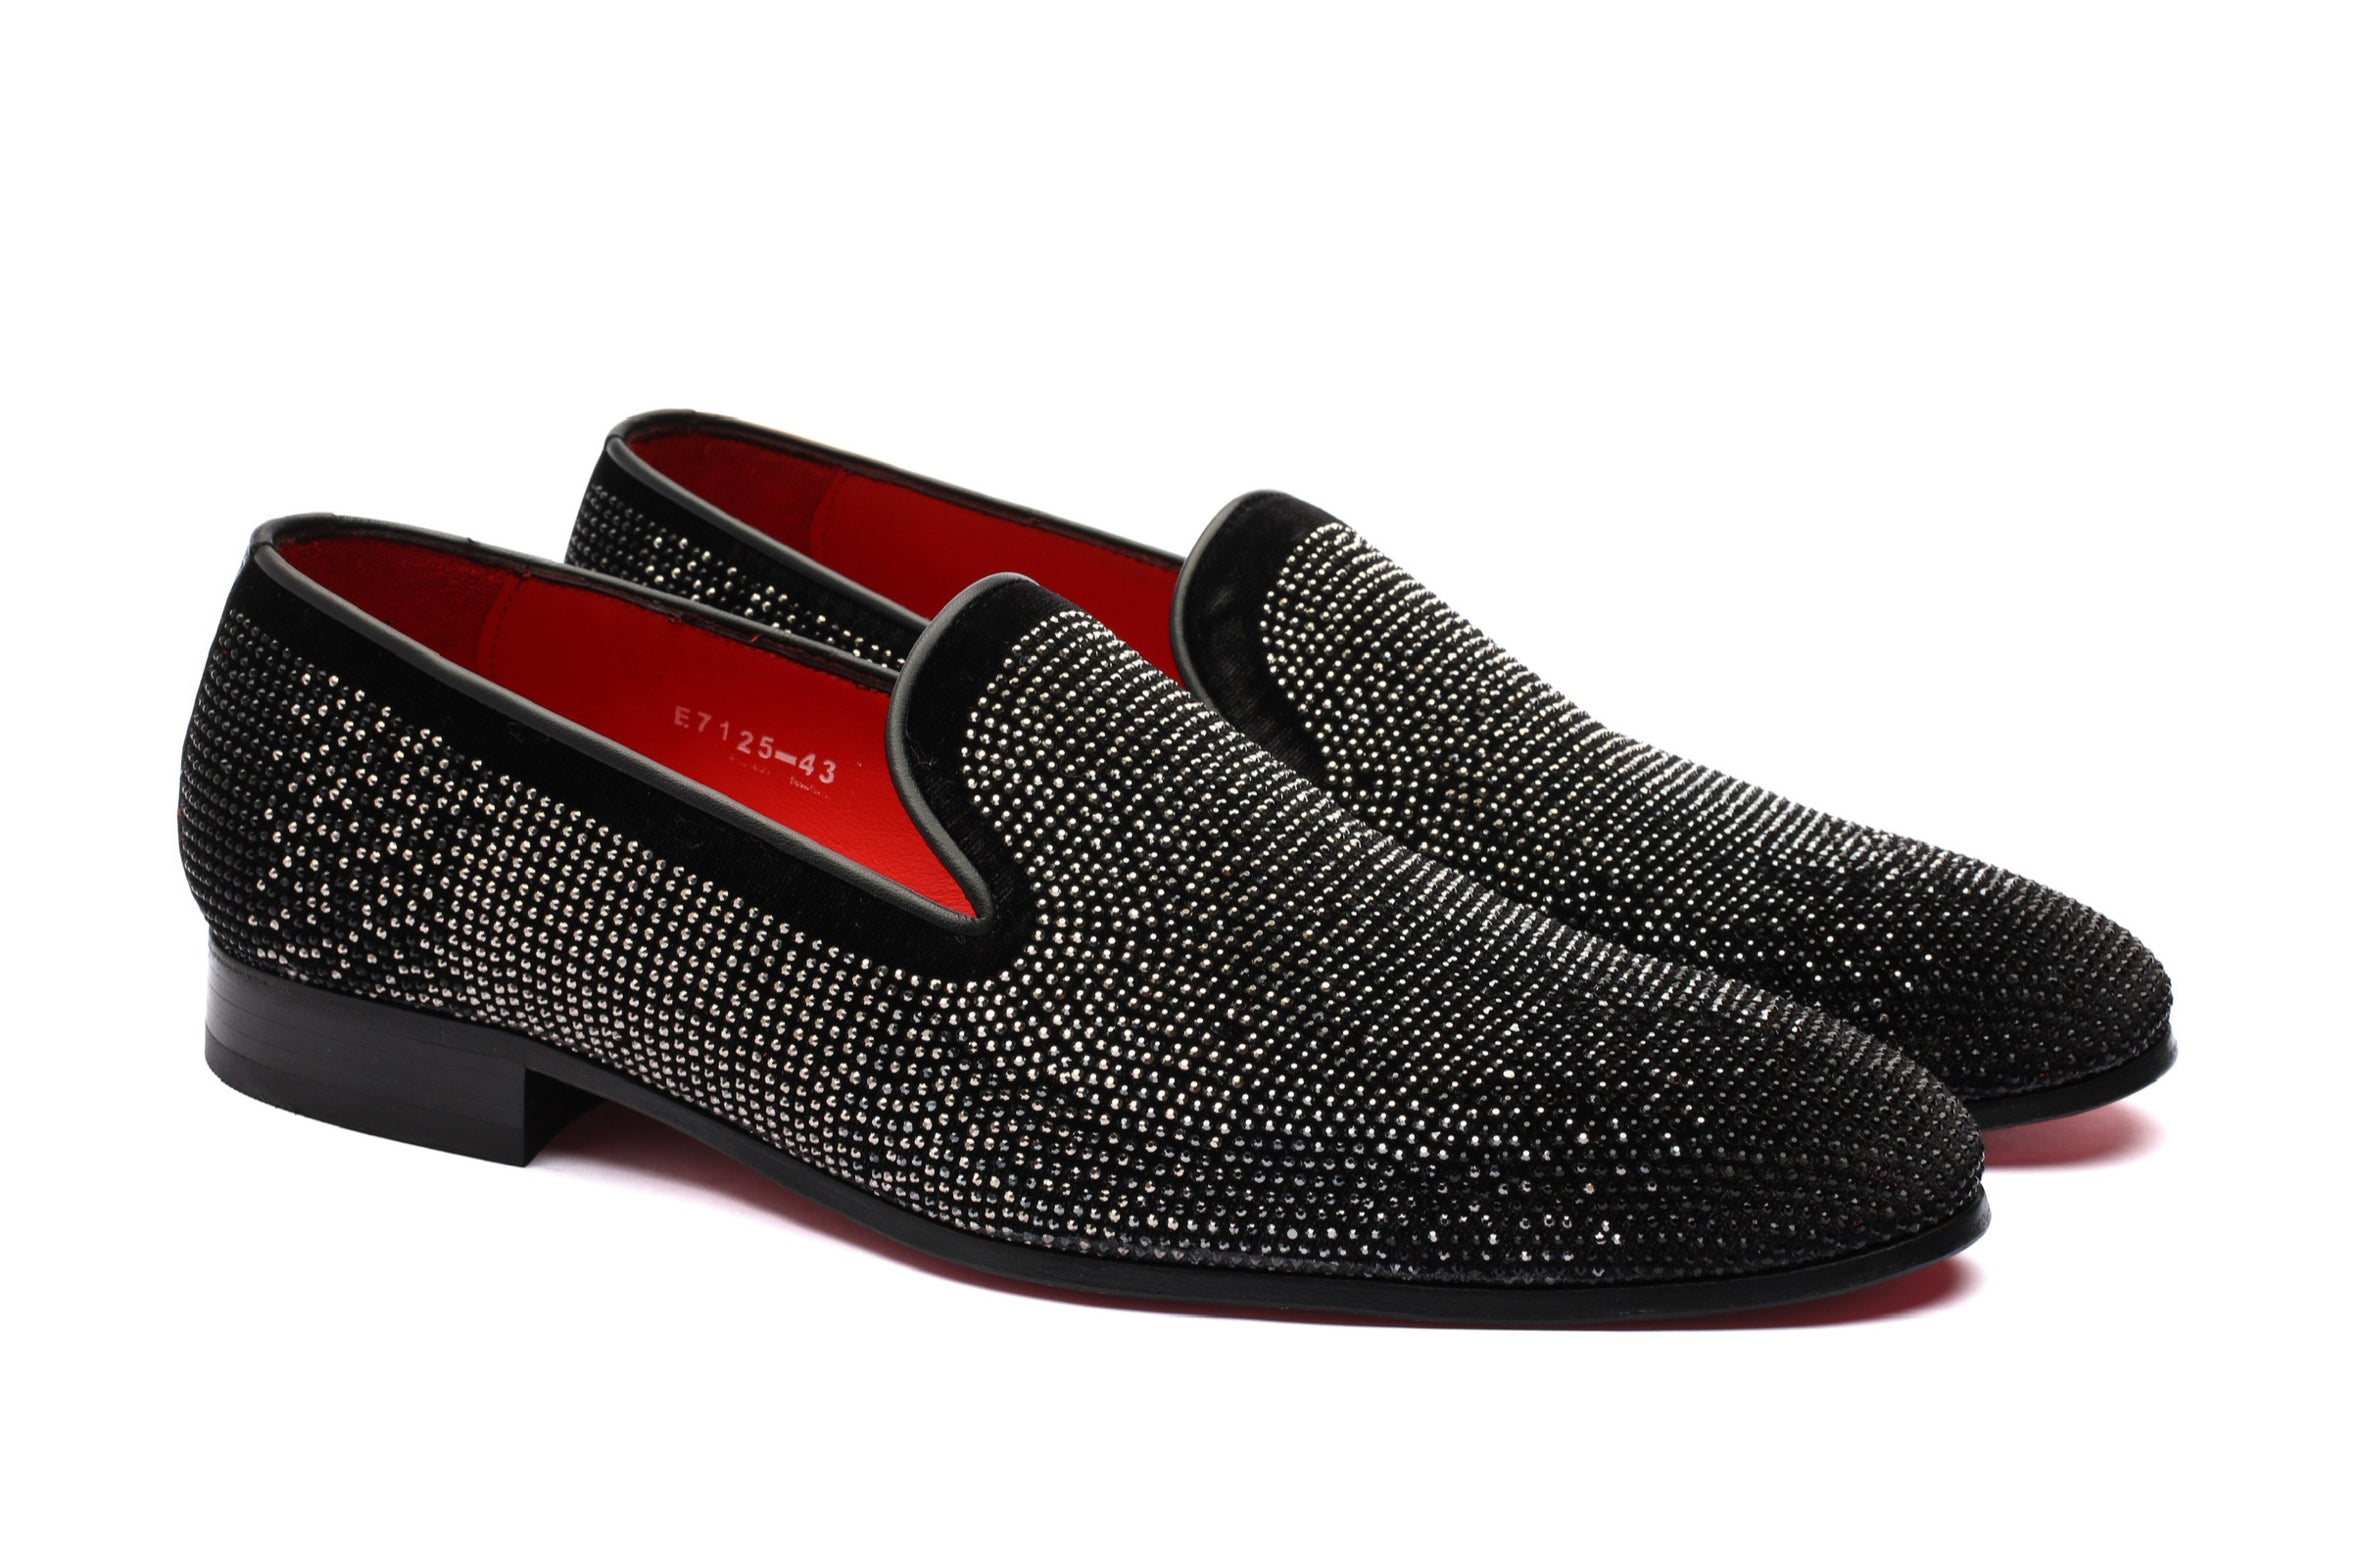 The Dominica Loafers - Handmade By Urbbana